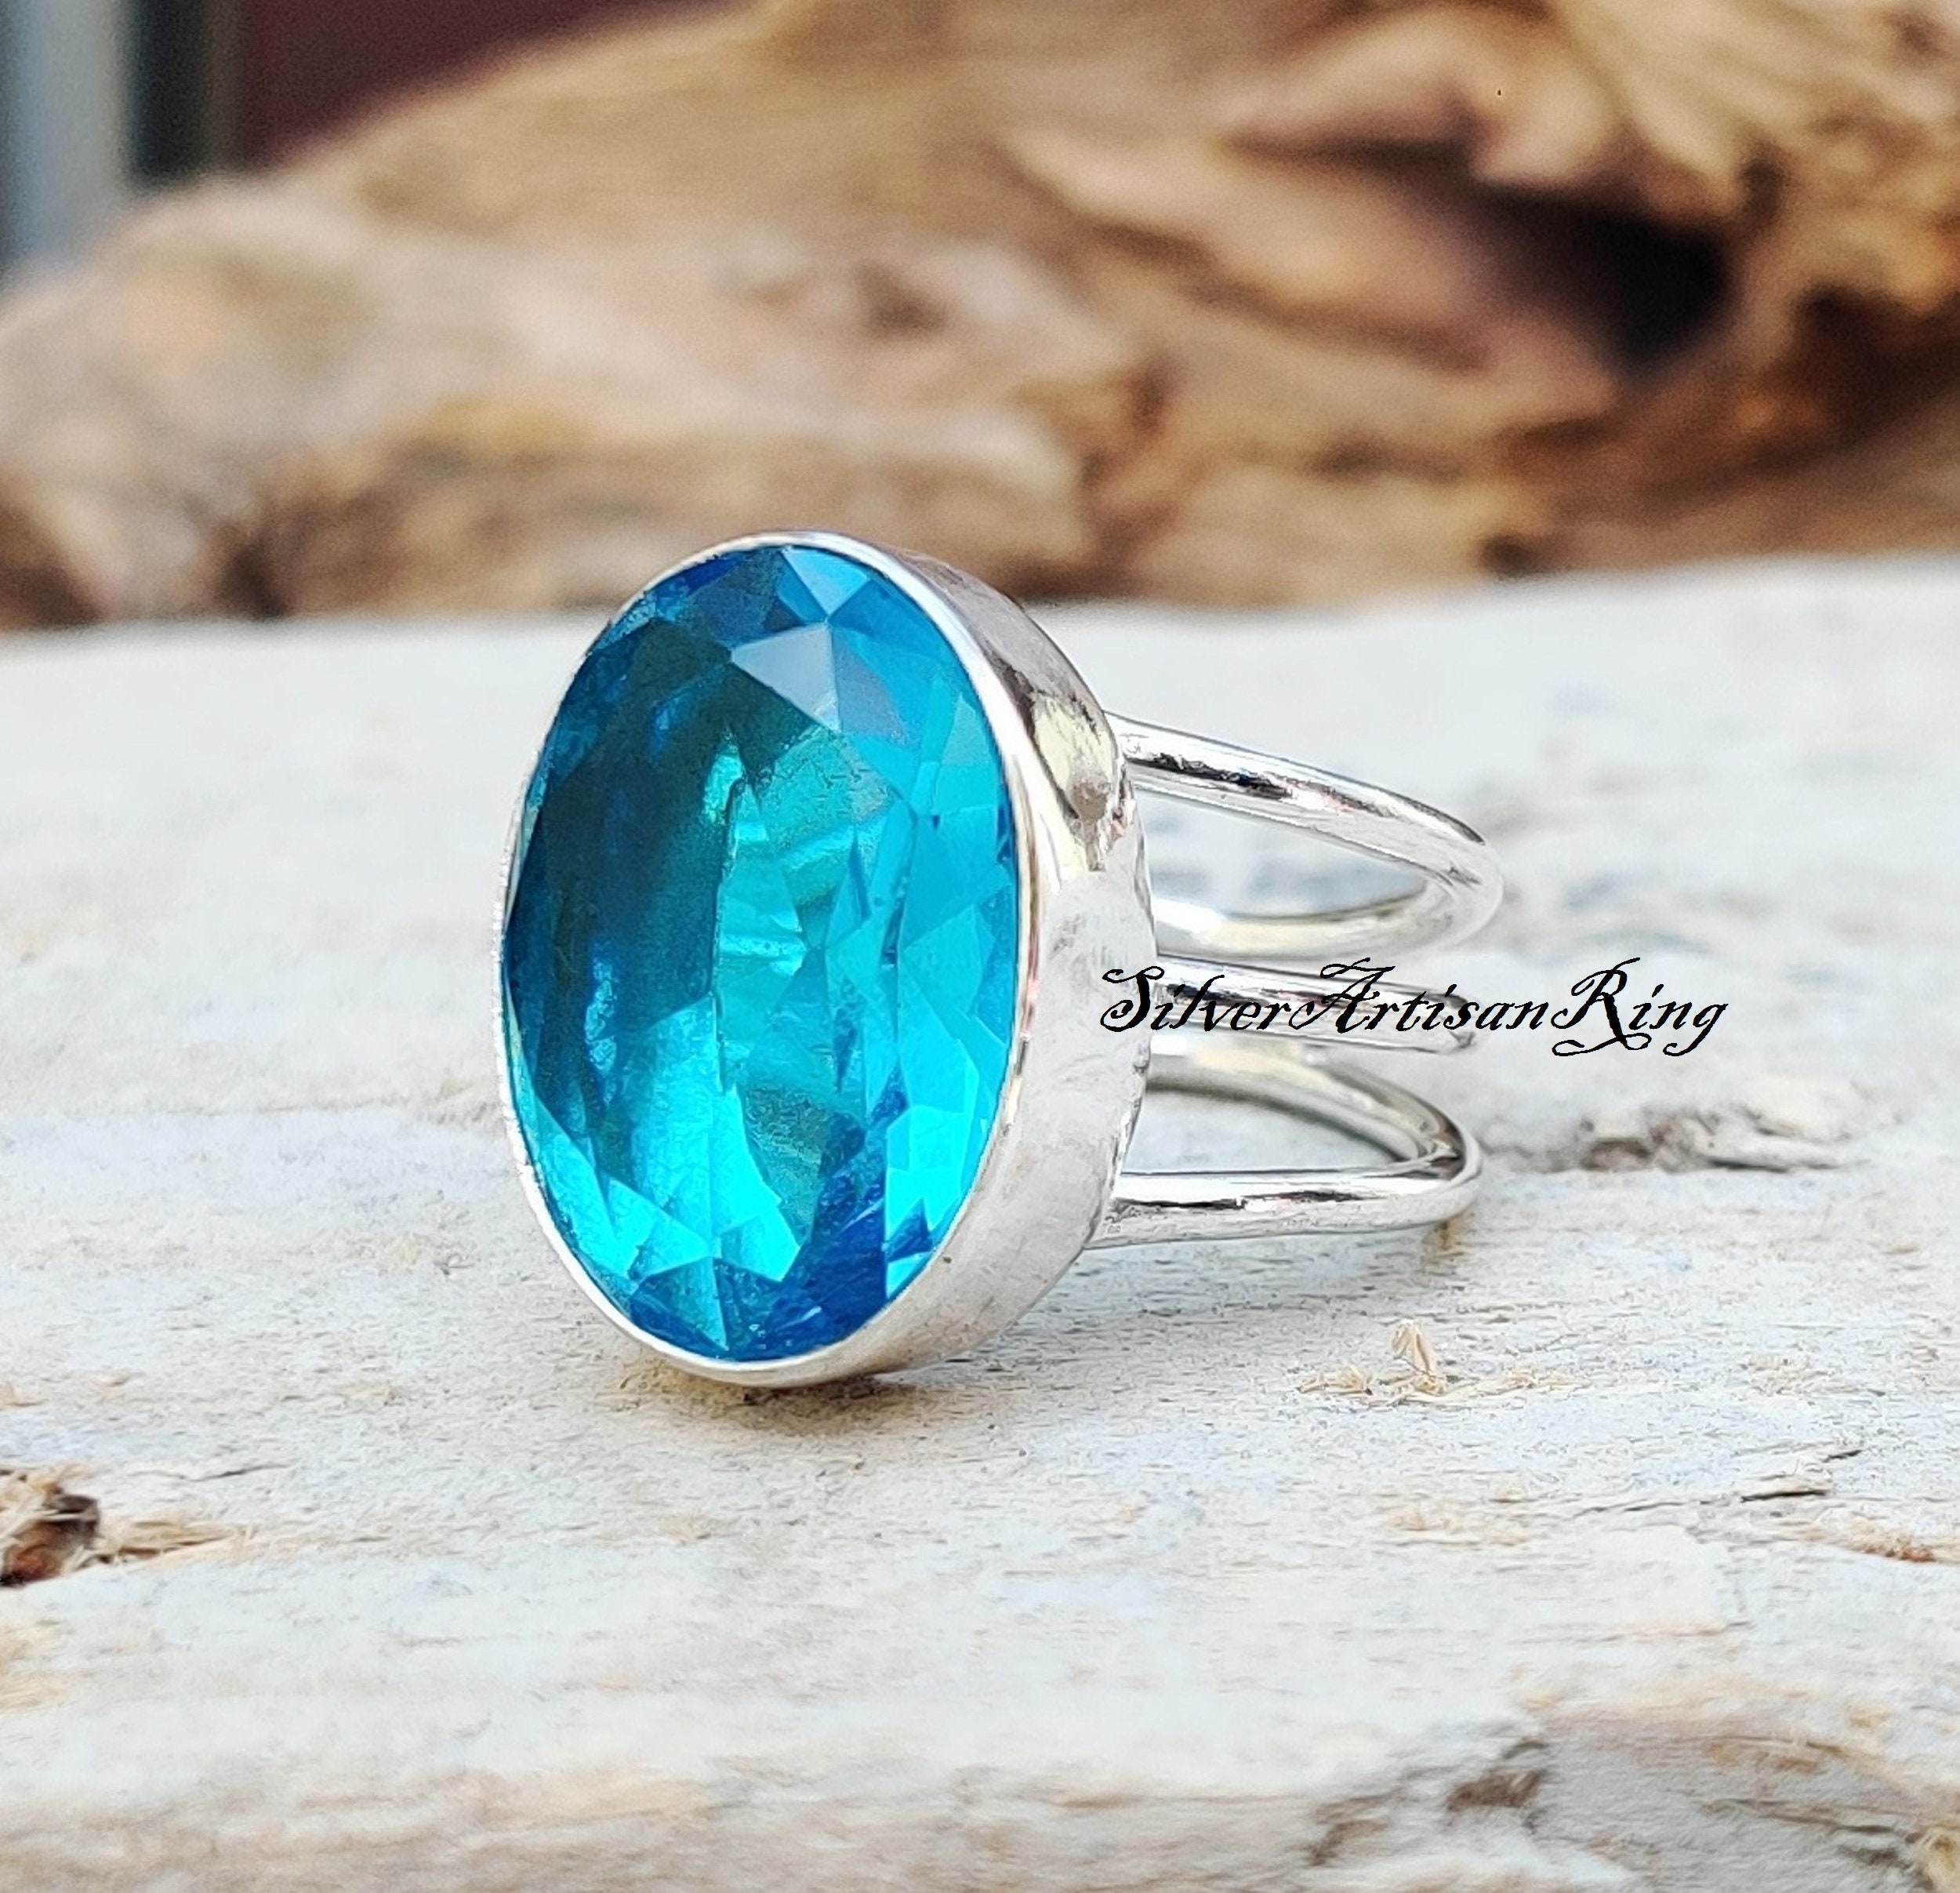 Sky Blue Topaz Ring, 925 Silver Sterling Ring, Topaz Stone Jewelry,  November Birthstone Ring, Propose Ring, Engagement Ring, Gift for Her -  Etsy | Sky blue topaz ring, Blue topaz ring, Topaz ring